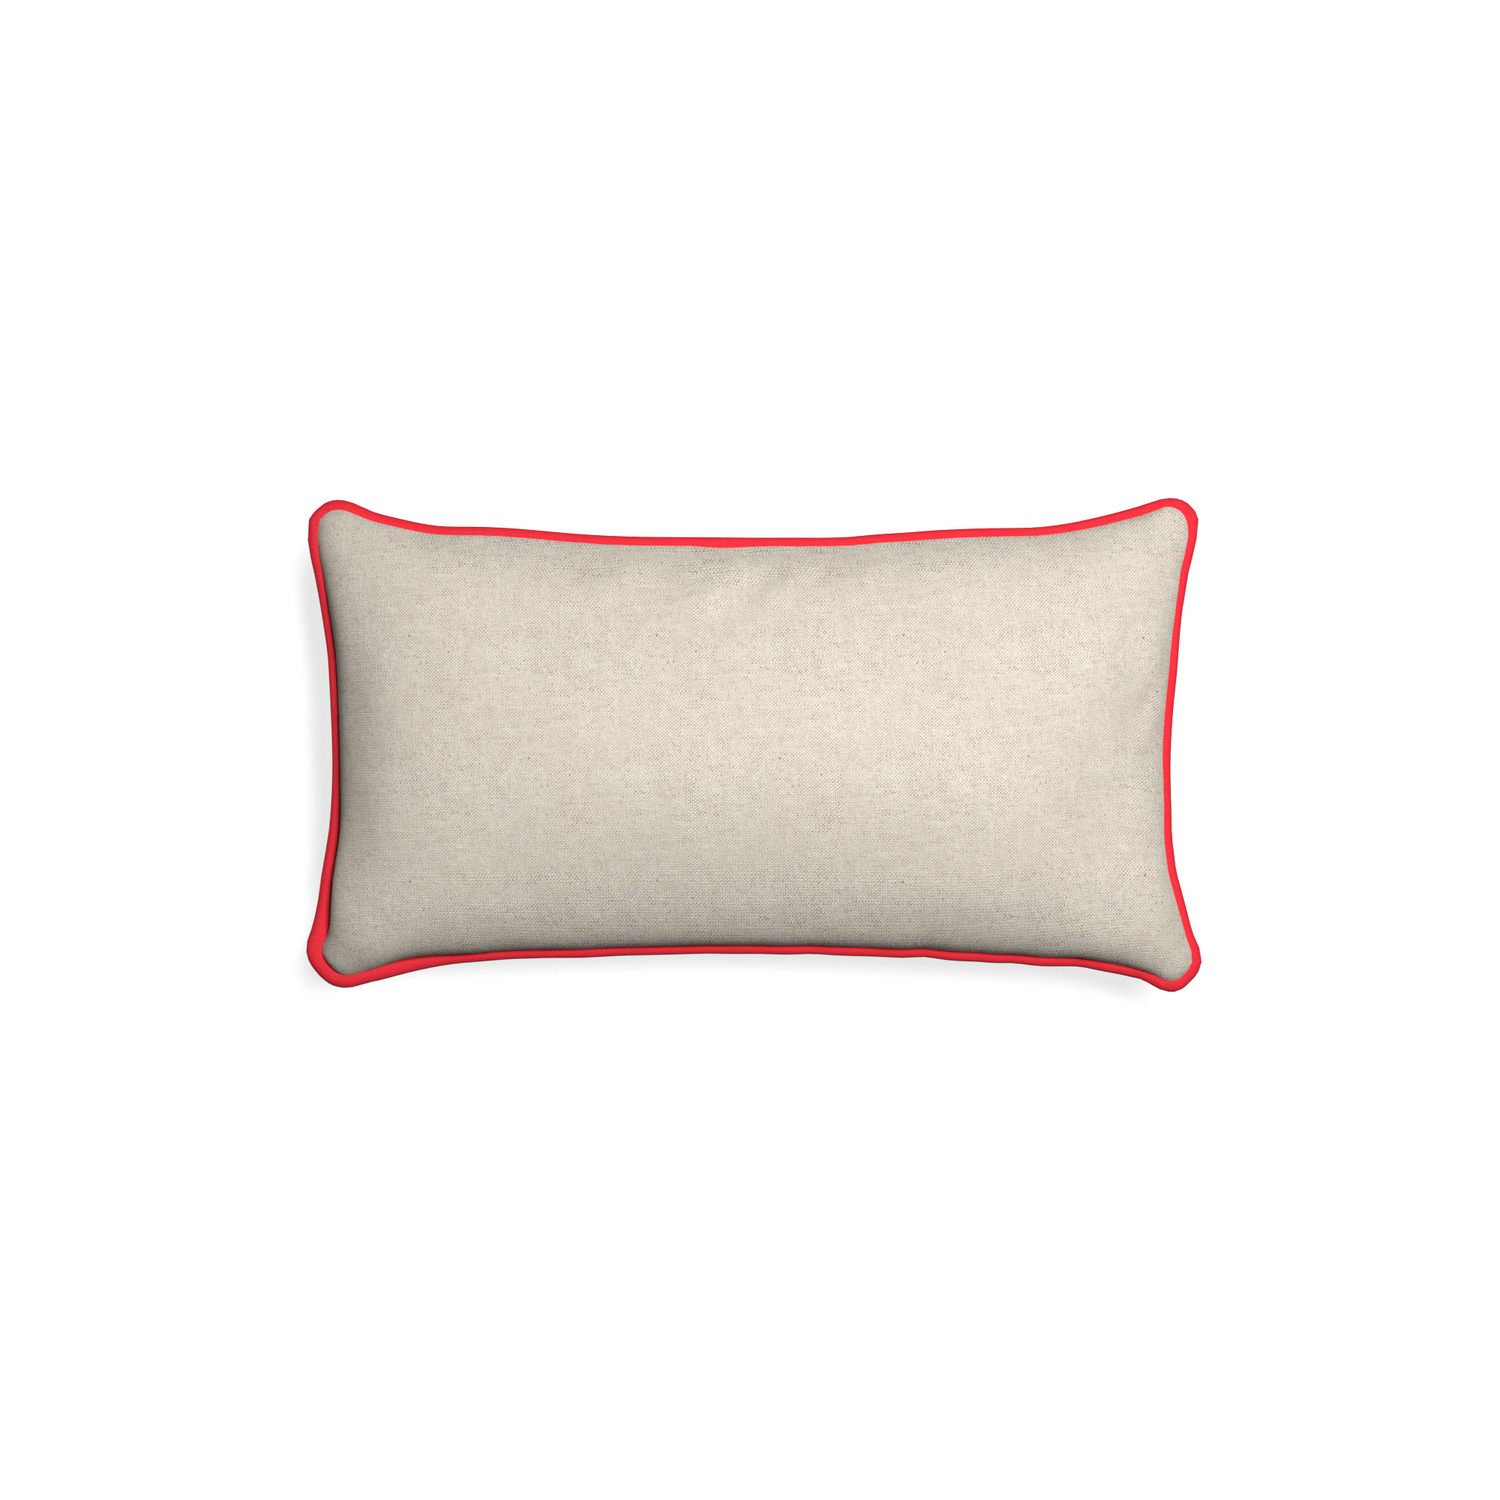 Petite-lumbar oat custom light brownpillow with cherry piping on white background